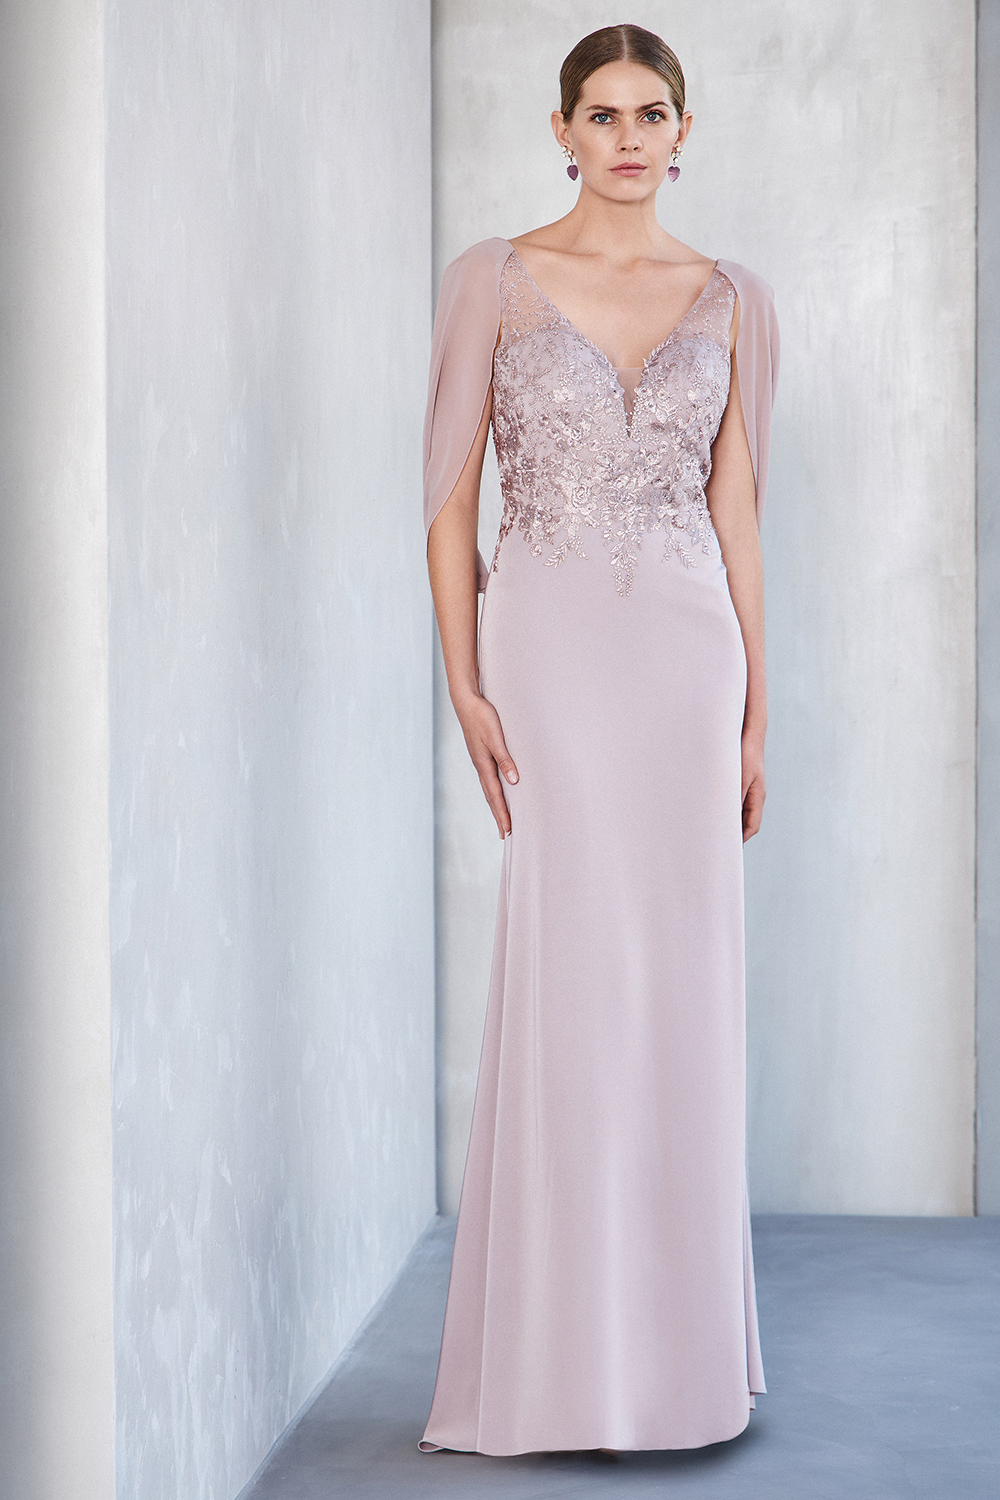 Classic Dresses / Long evening satin beaded dress with lace top and long sleeves with chiffon